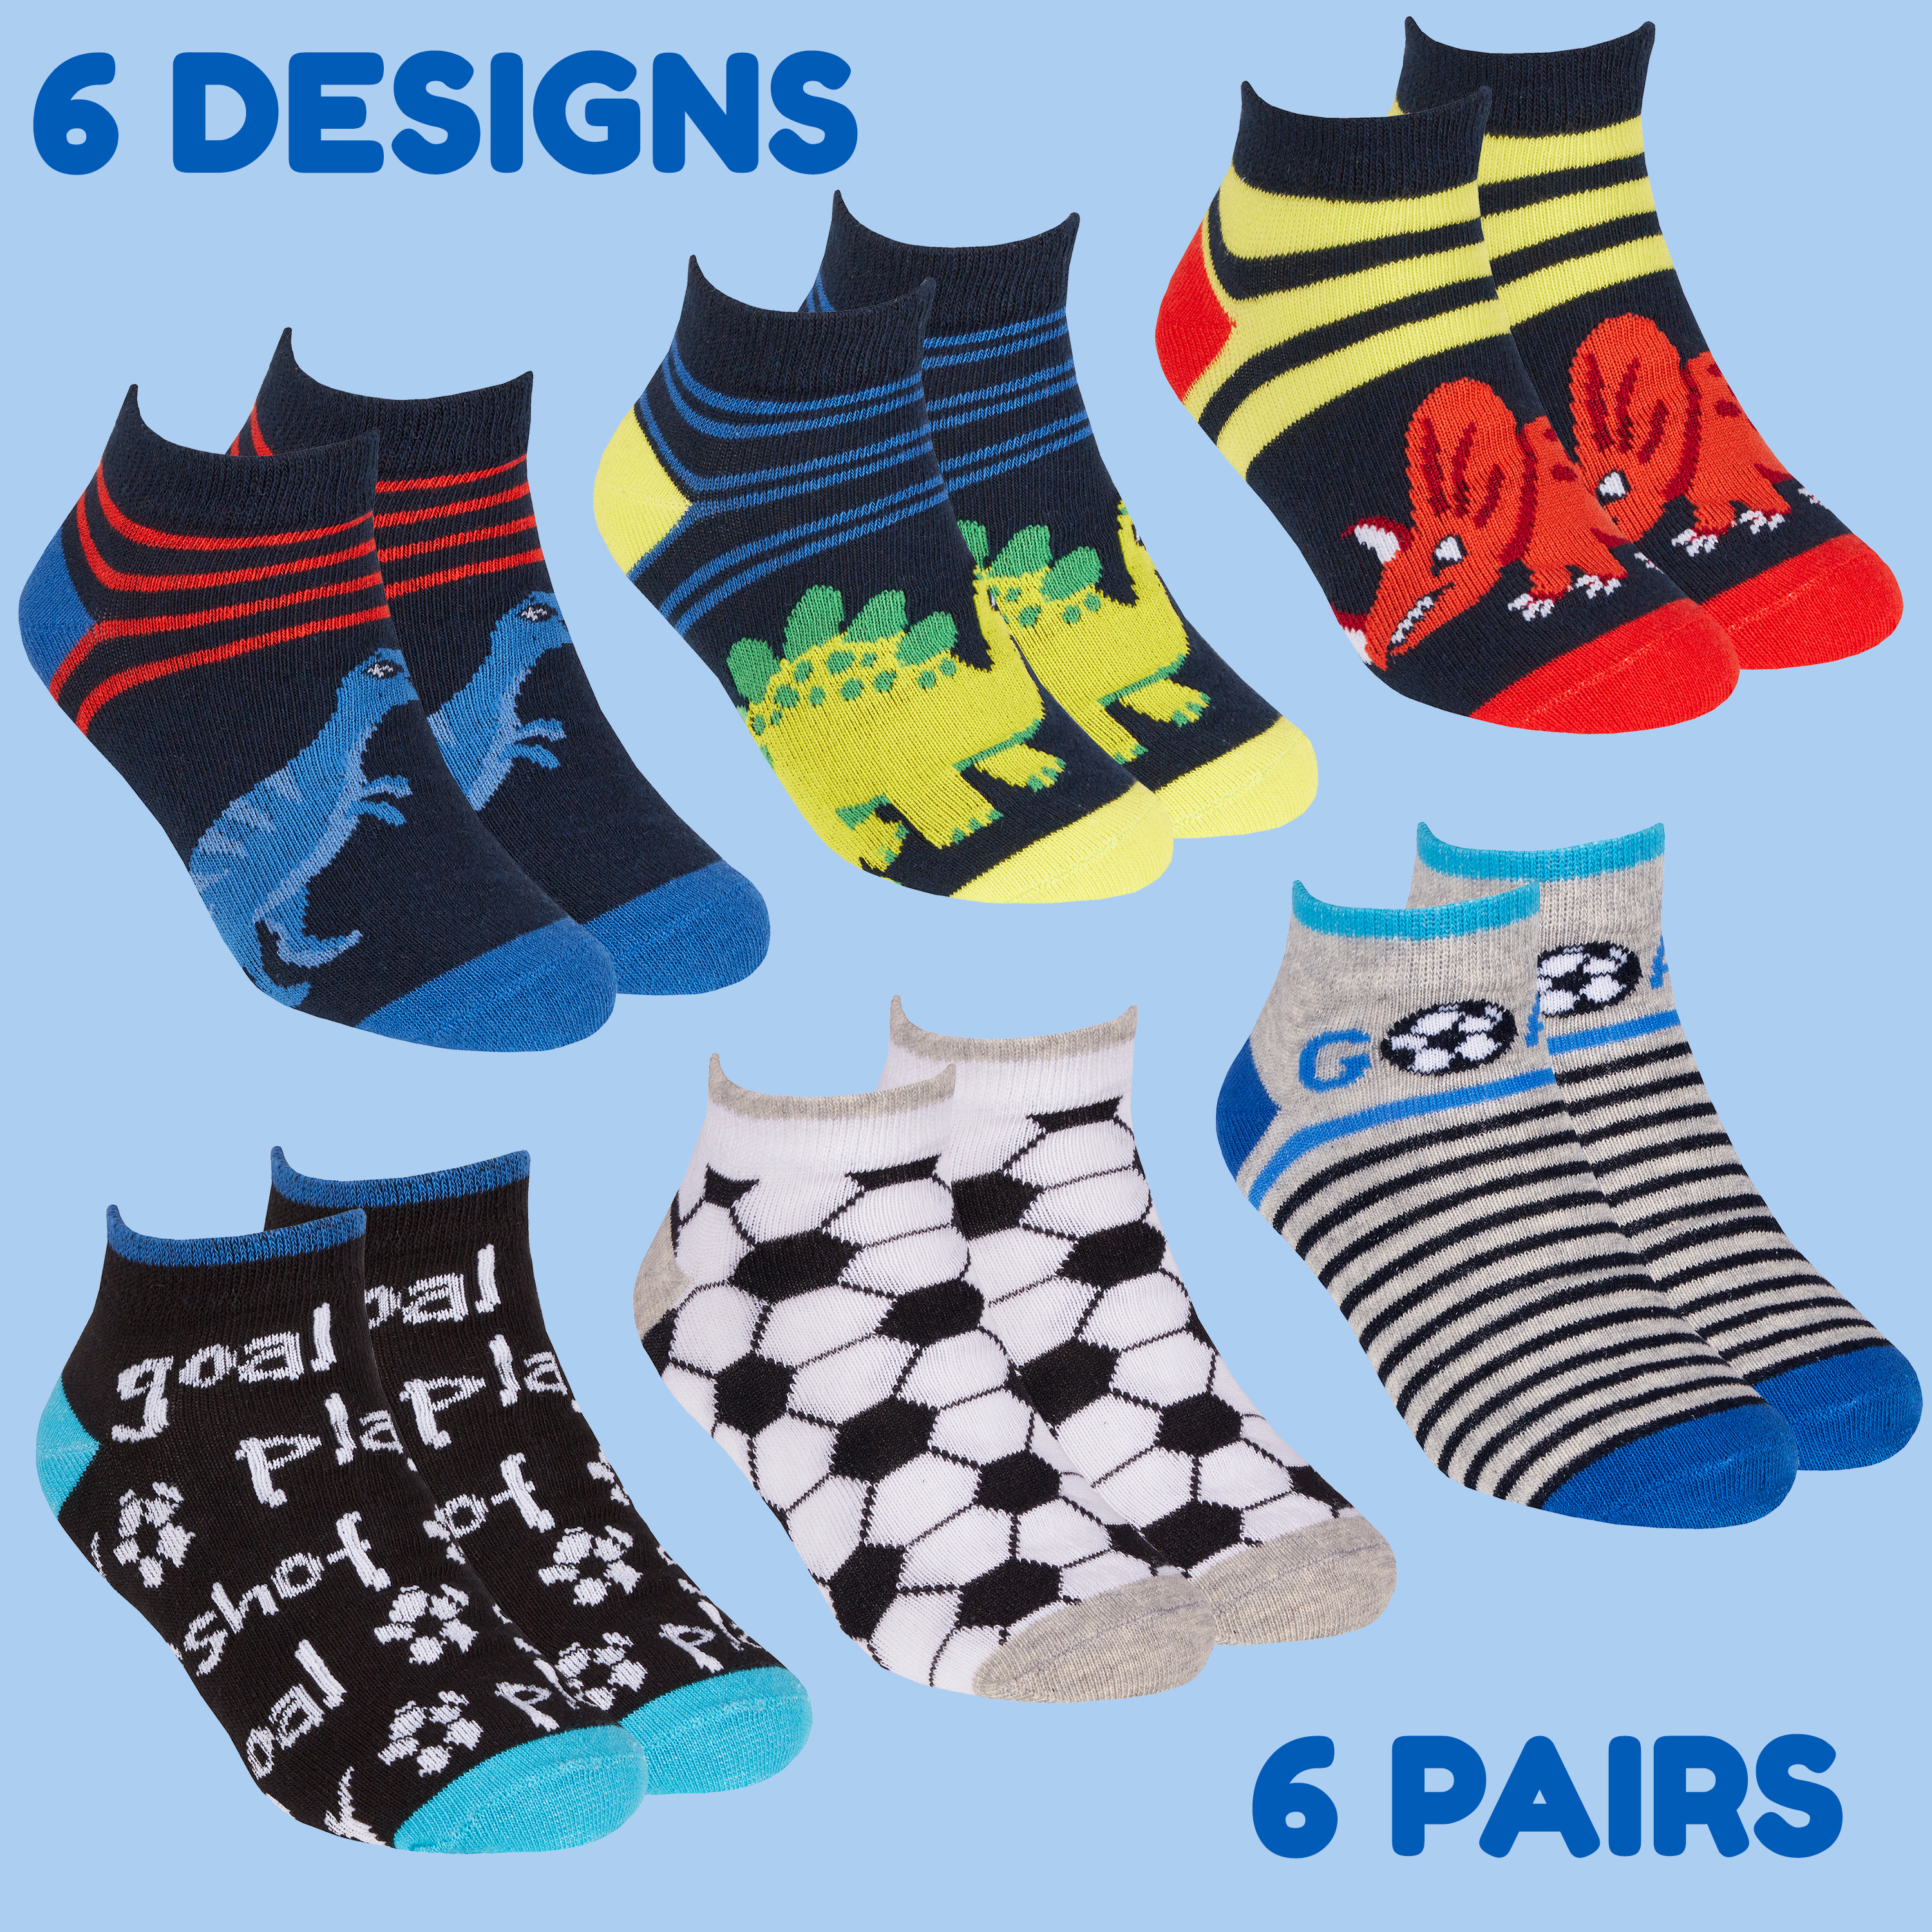 6 Pairs White Boys Trainer Socks Cotton Rich Sports Shoe Liners Kids Size 9-12